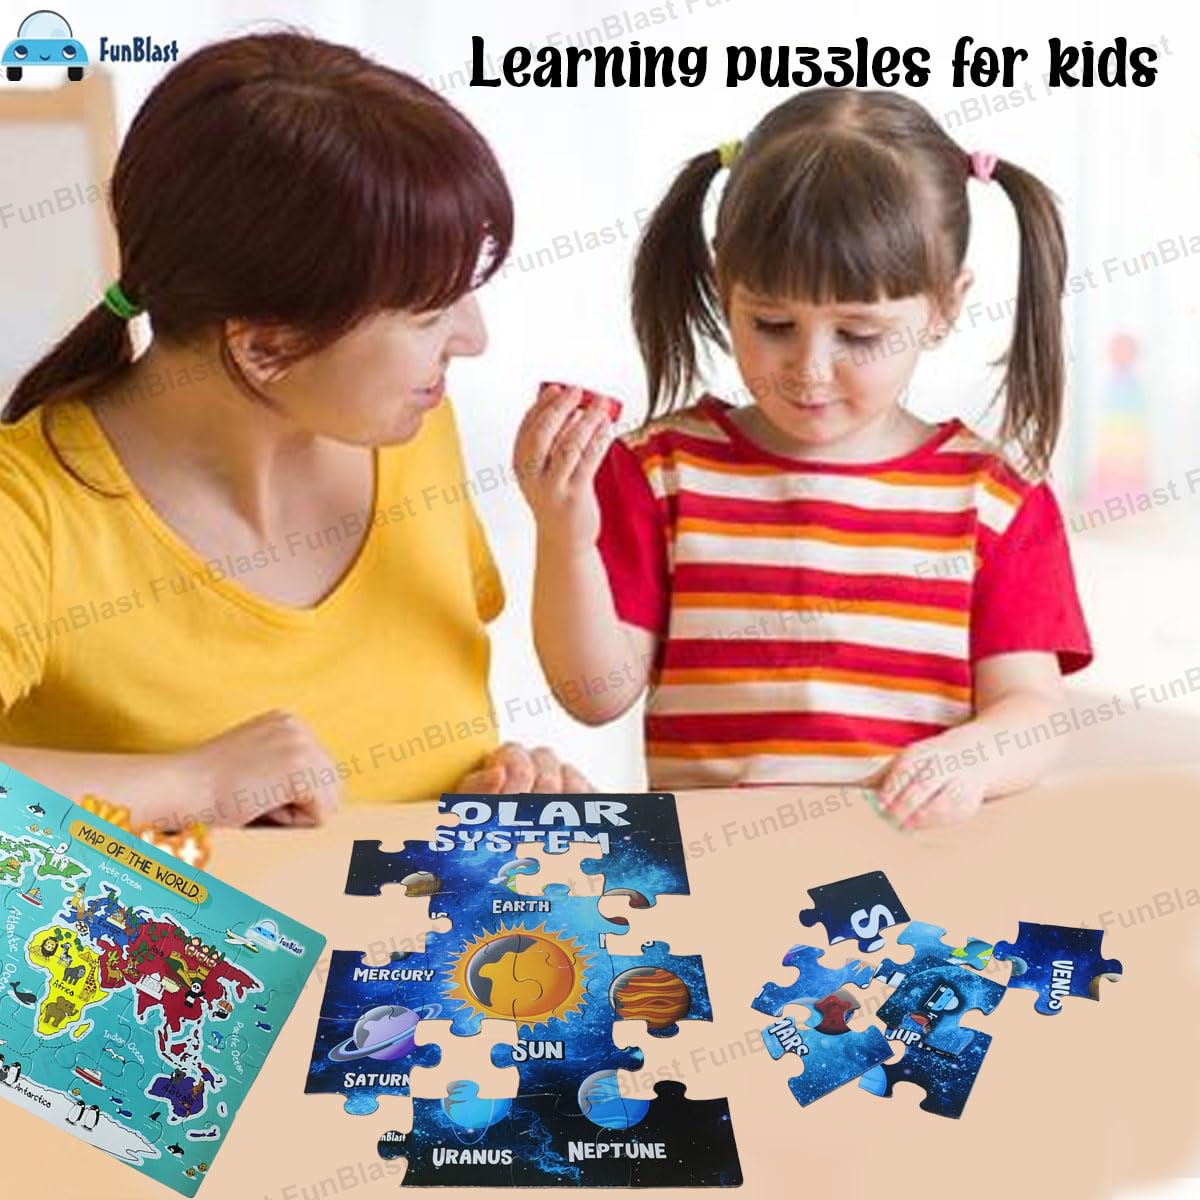 3 in 1 Jigsaw Puzzle for Kids - Solar System, Map of India and World Map Jigsaw Puzzles, Learning and Educational Puzzles for Children – 72 Pcs Puzzles